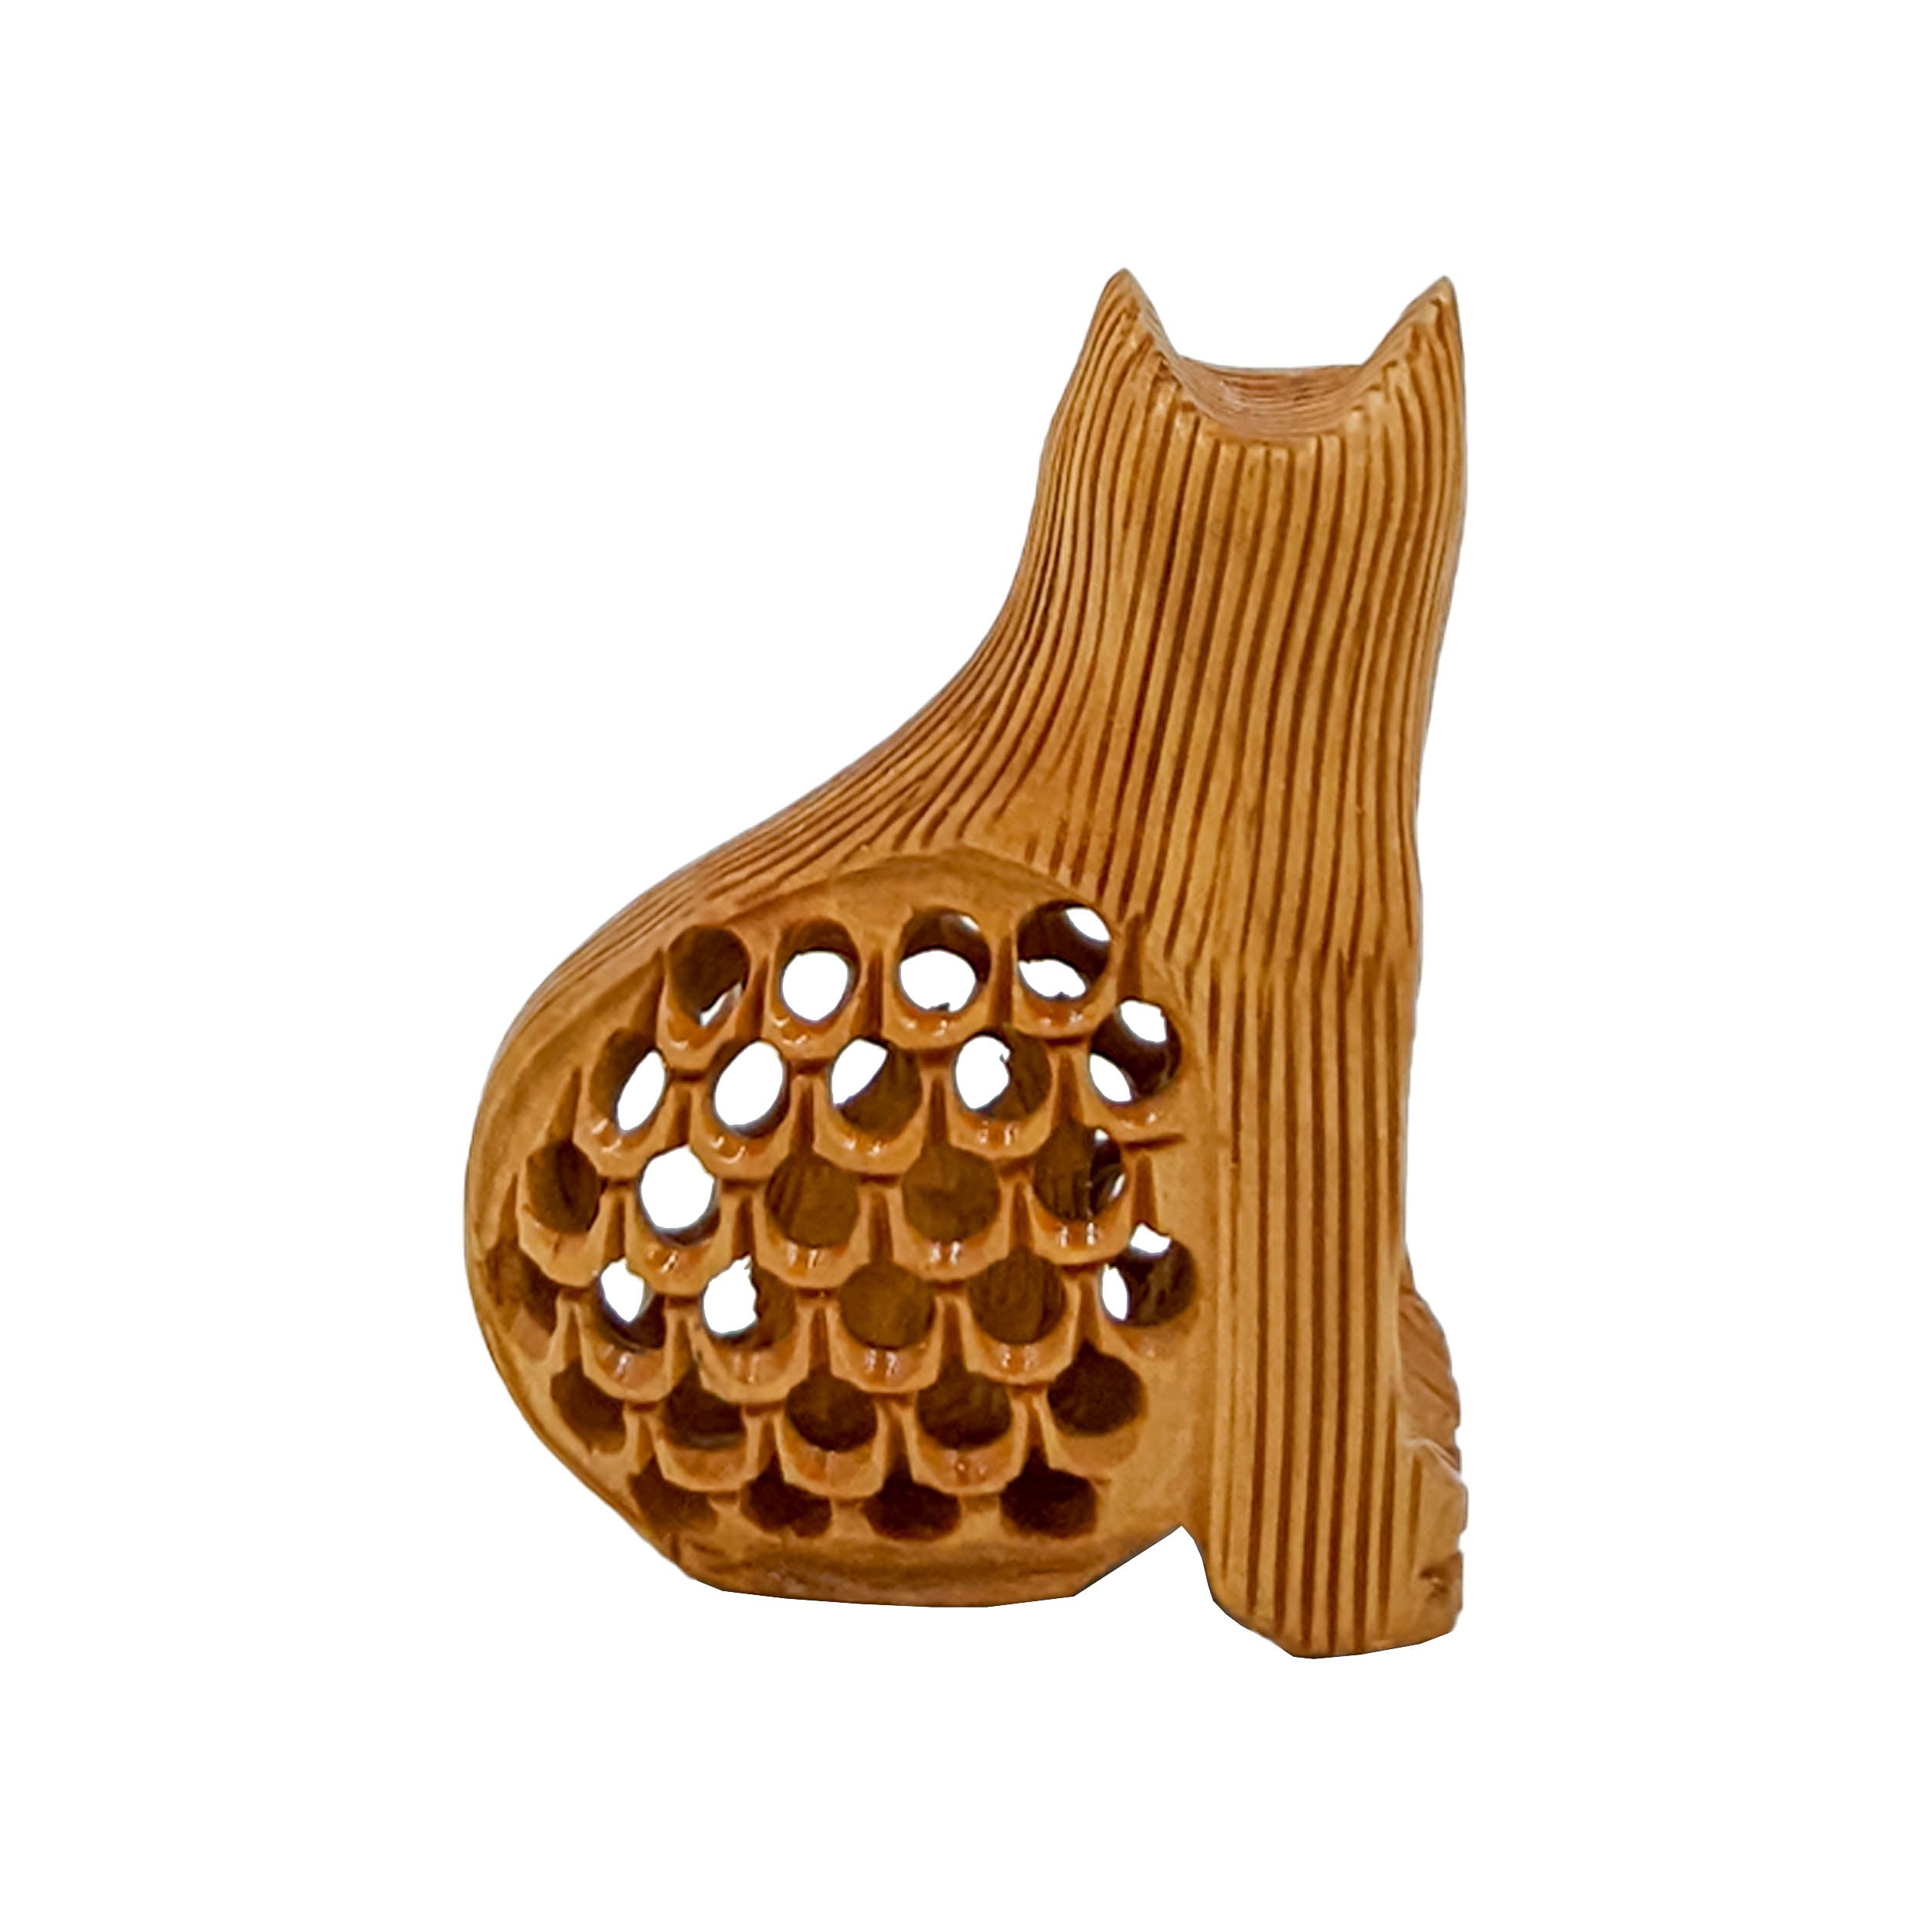 Handcrafted Wooden Jaali Cat Sitting